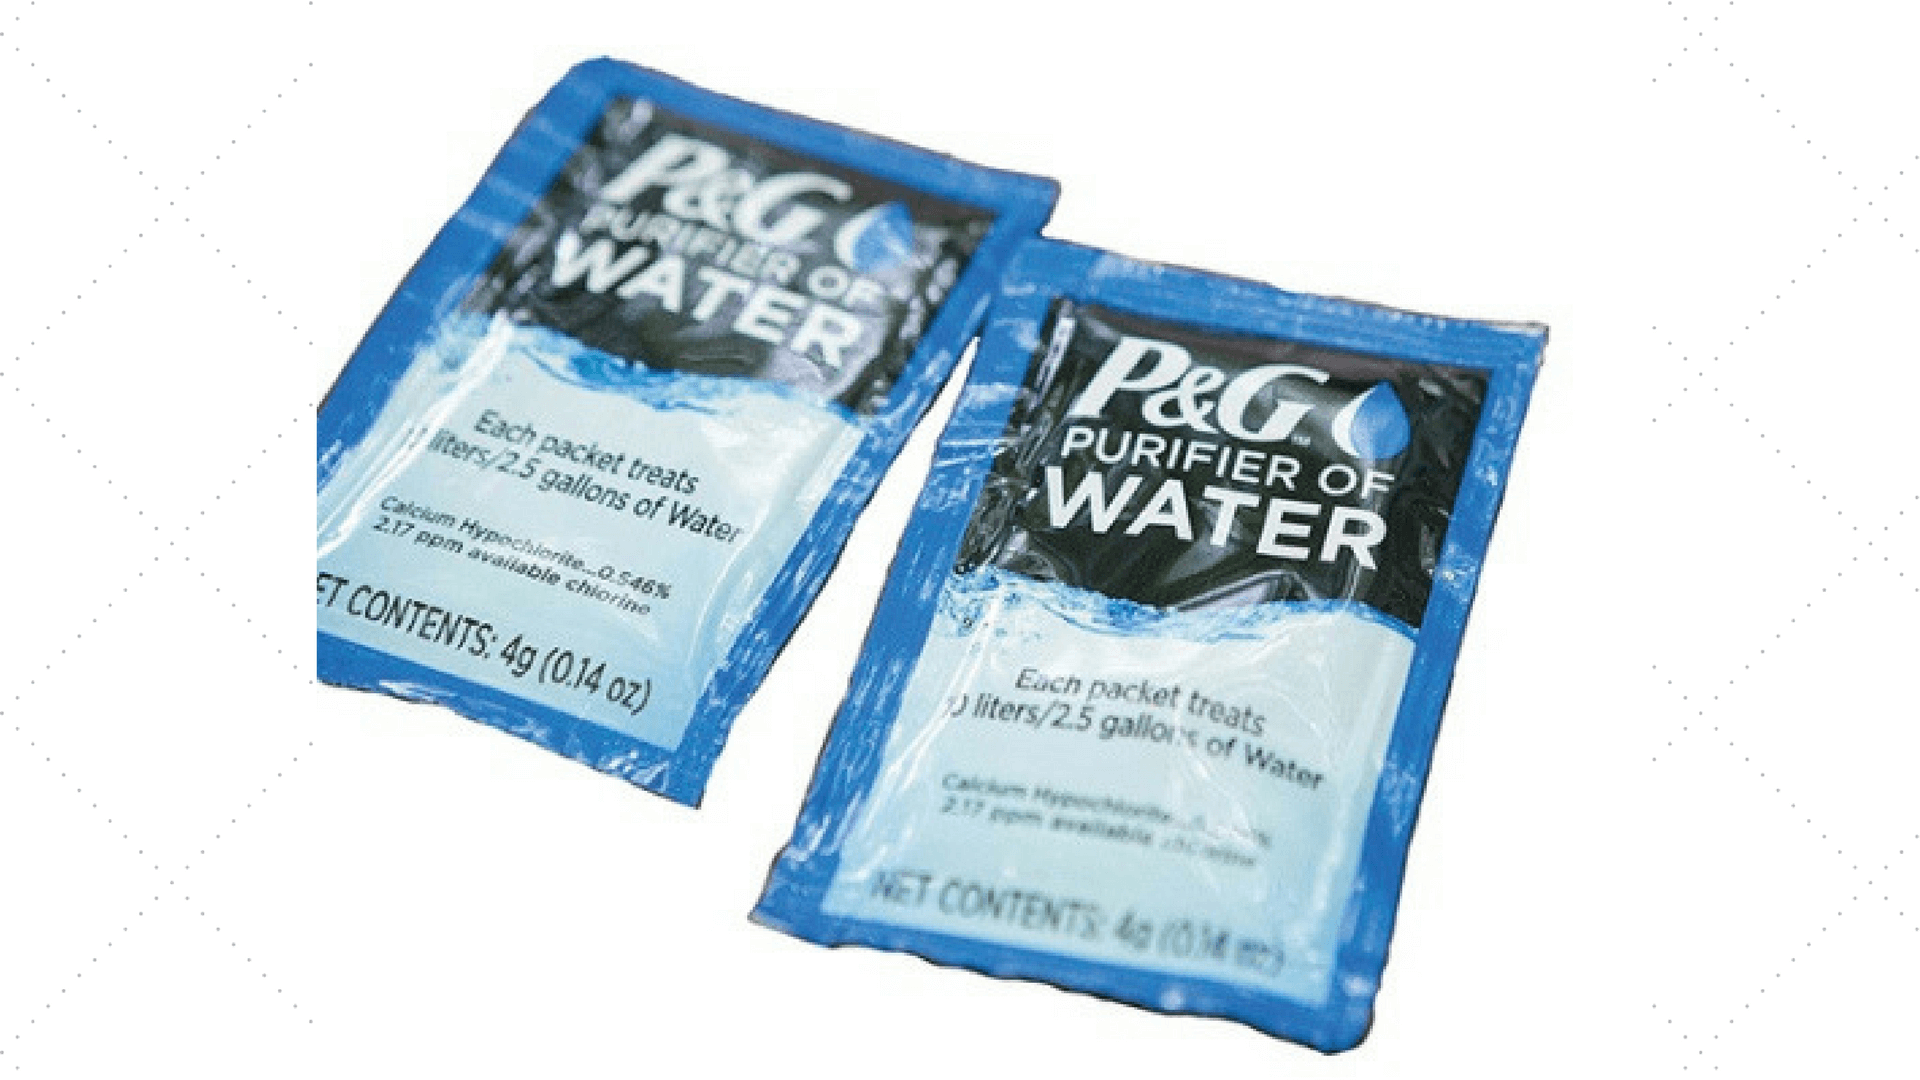 P&G Water Purification Packets